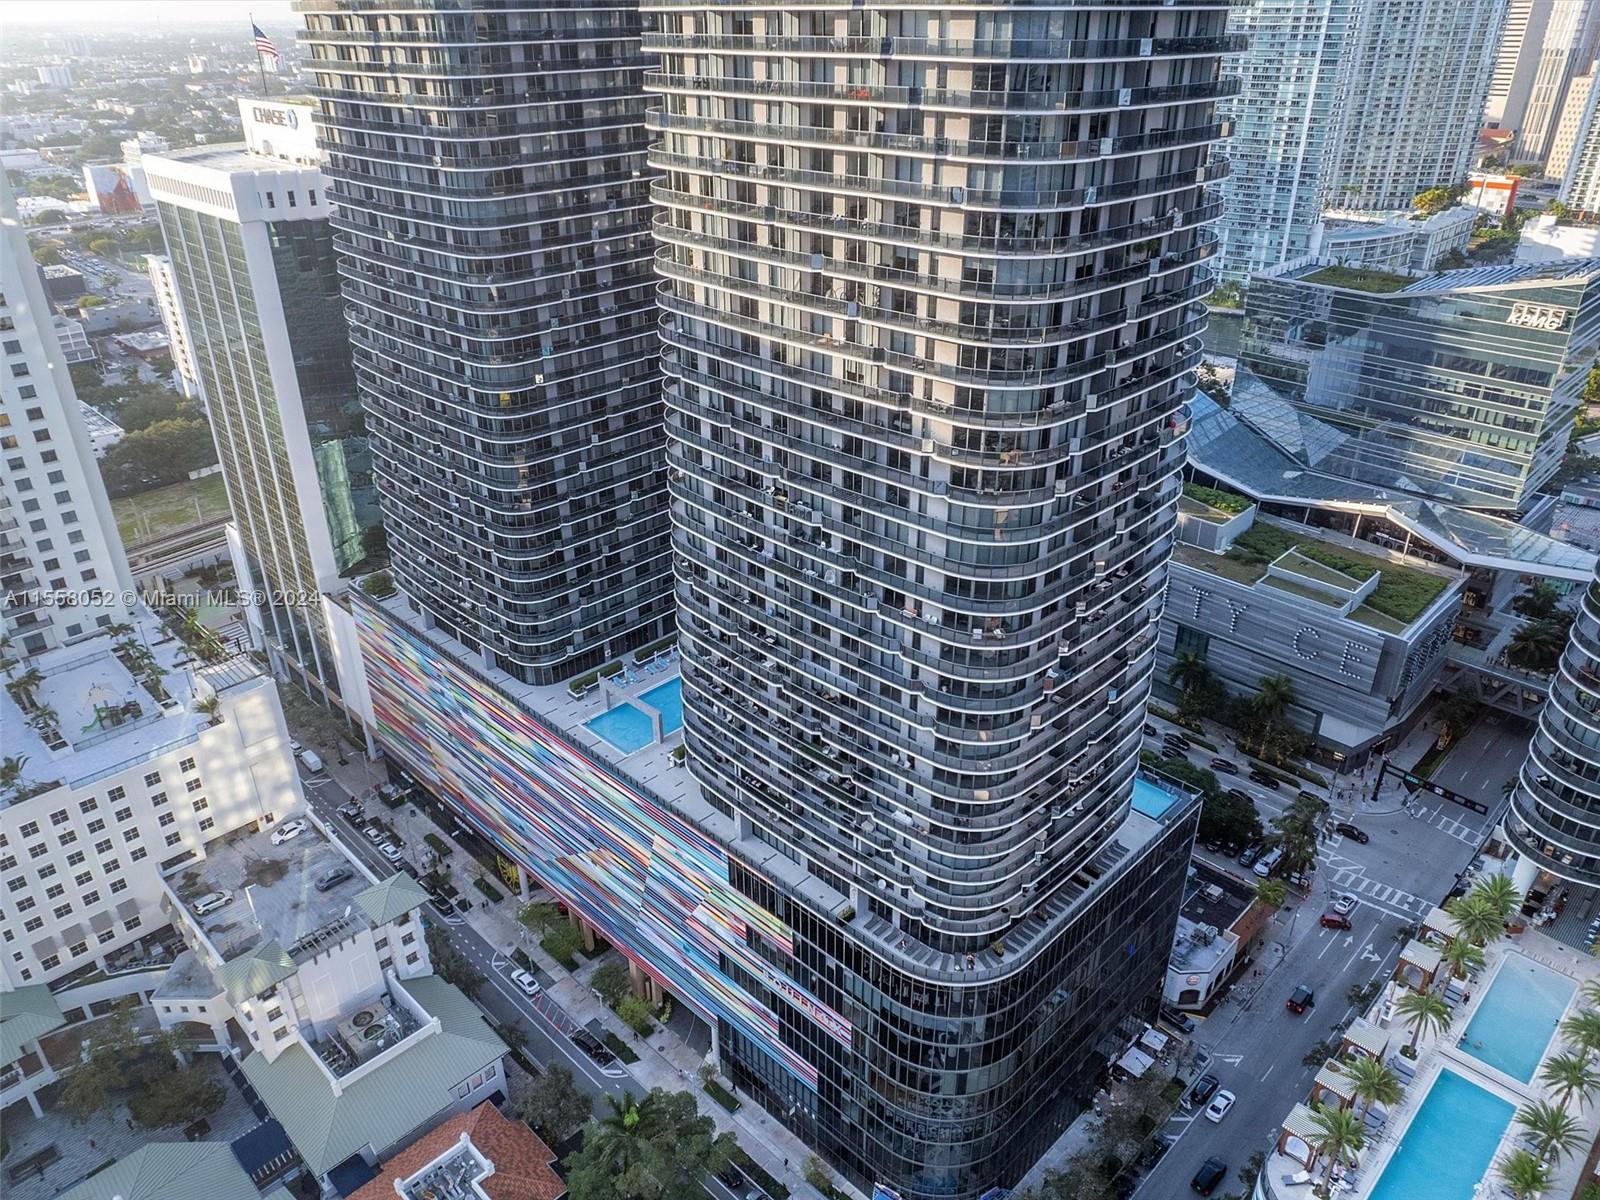 Do not miss this beautiful home! THE BEST 2BD+Den/2.5Bath corner unit in Brickell. Located in Brickell Heights East, floor to ceiling windows with stunning SE-bay views & Brickell skyline, spacious wraparound balcony (over 300 square feet), spacious split floor plan, porcelain flooring throughout, upgraded appliances, window treatments & open gourmet kitchen WITH KITCHEN ISLAND. Building offers 5 star resort-like amenities including a gorgeous rooftop pool along with a second, 9th-floor pool, great gym and spa, steam and sauna rooms, theater & playroom, lounge area, 24-hour FRONT DESK AND VALET SERVICE. Super-location: one block away from Brickell City Center and steps away from shopping, dining, and the best entertainment Brickell has to offer.